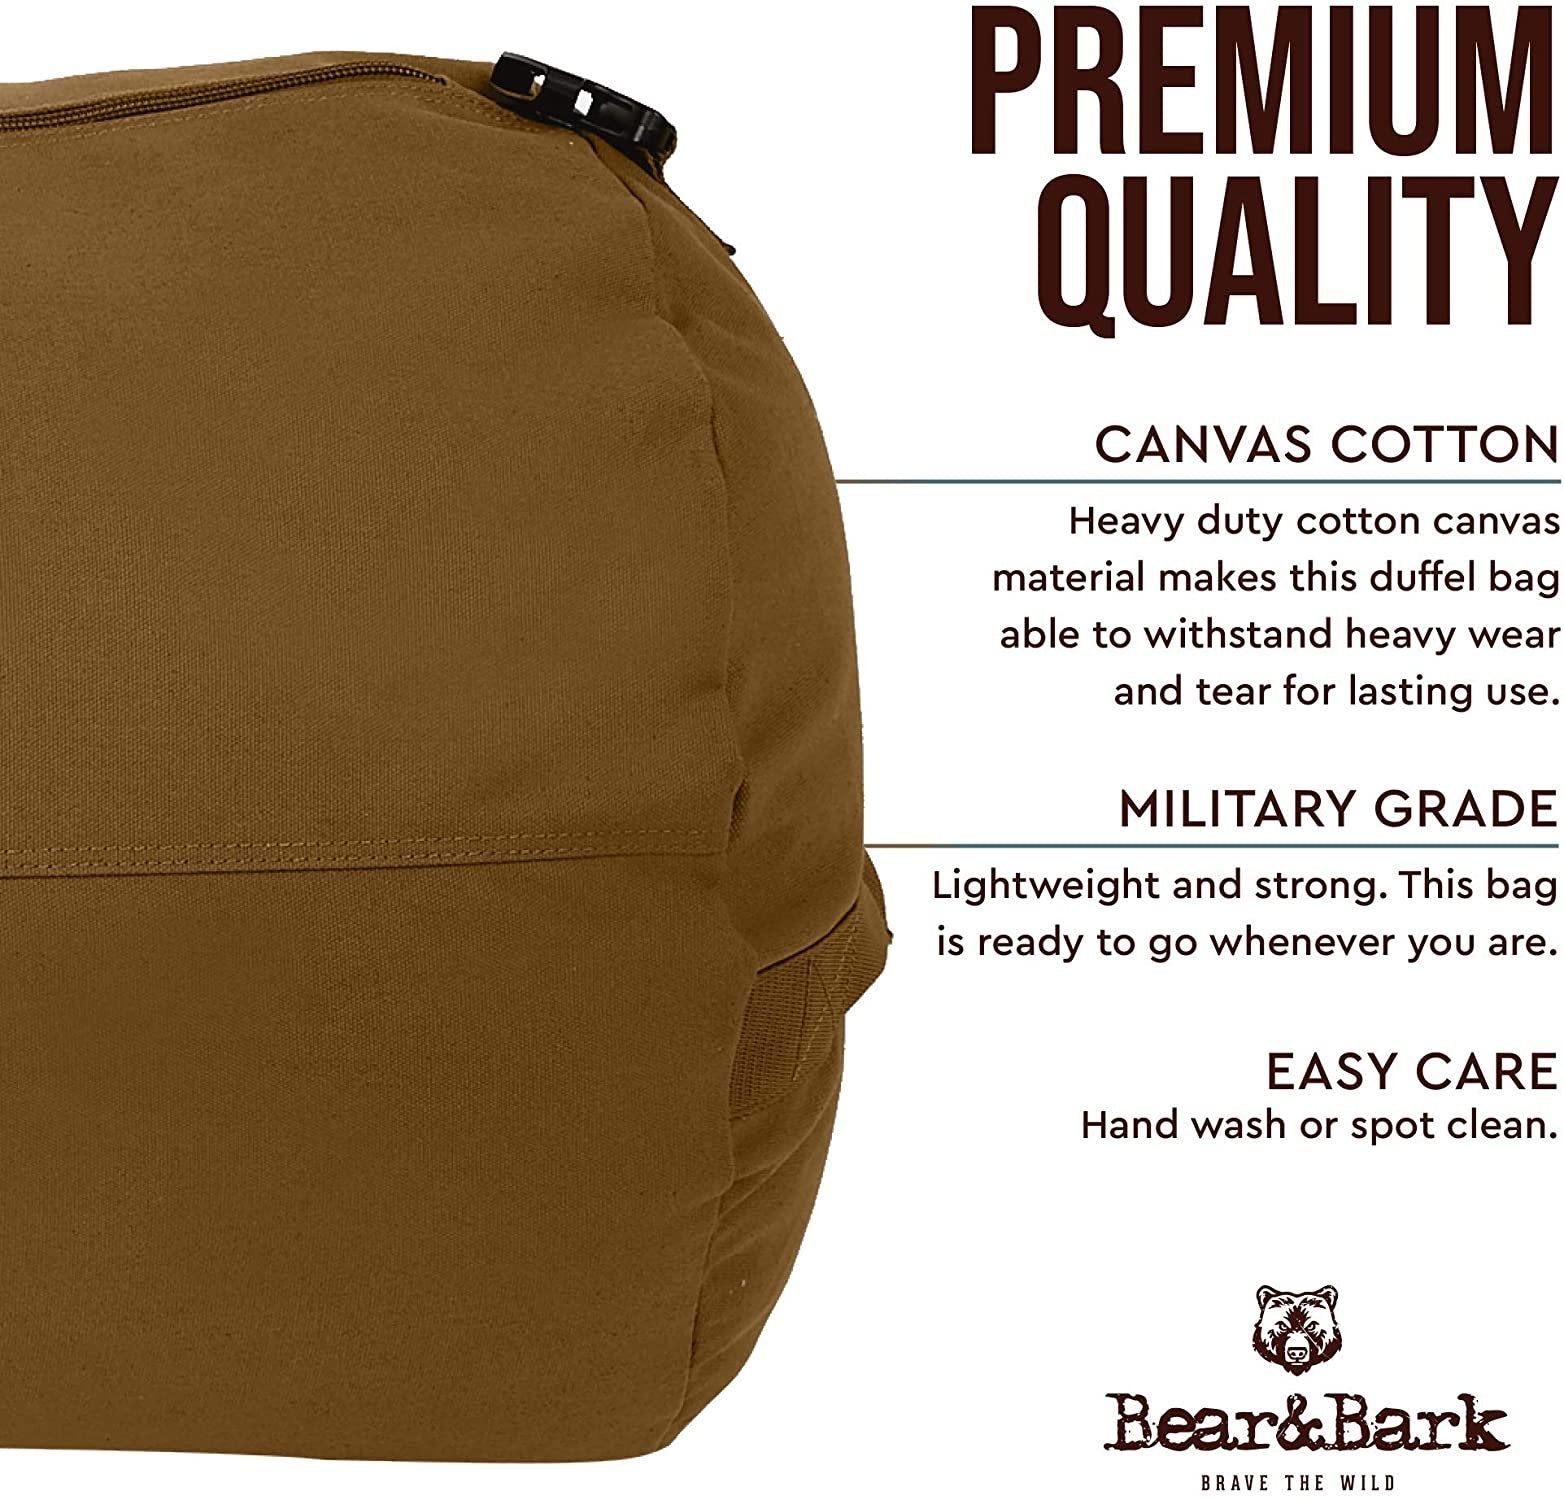 X-Large Desert Brown Canvas Duffle Bag - 46x20 - Military Army Cargo Style - 236.8L - Great for Travel, College, Backpacking & Storage